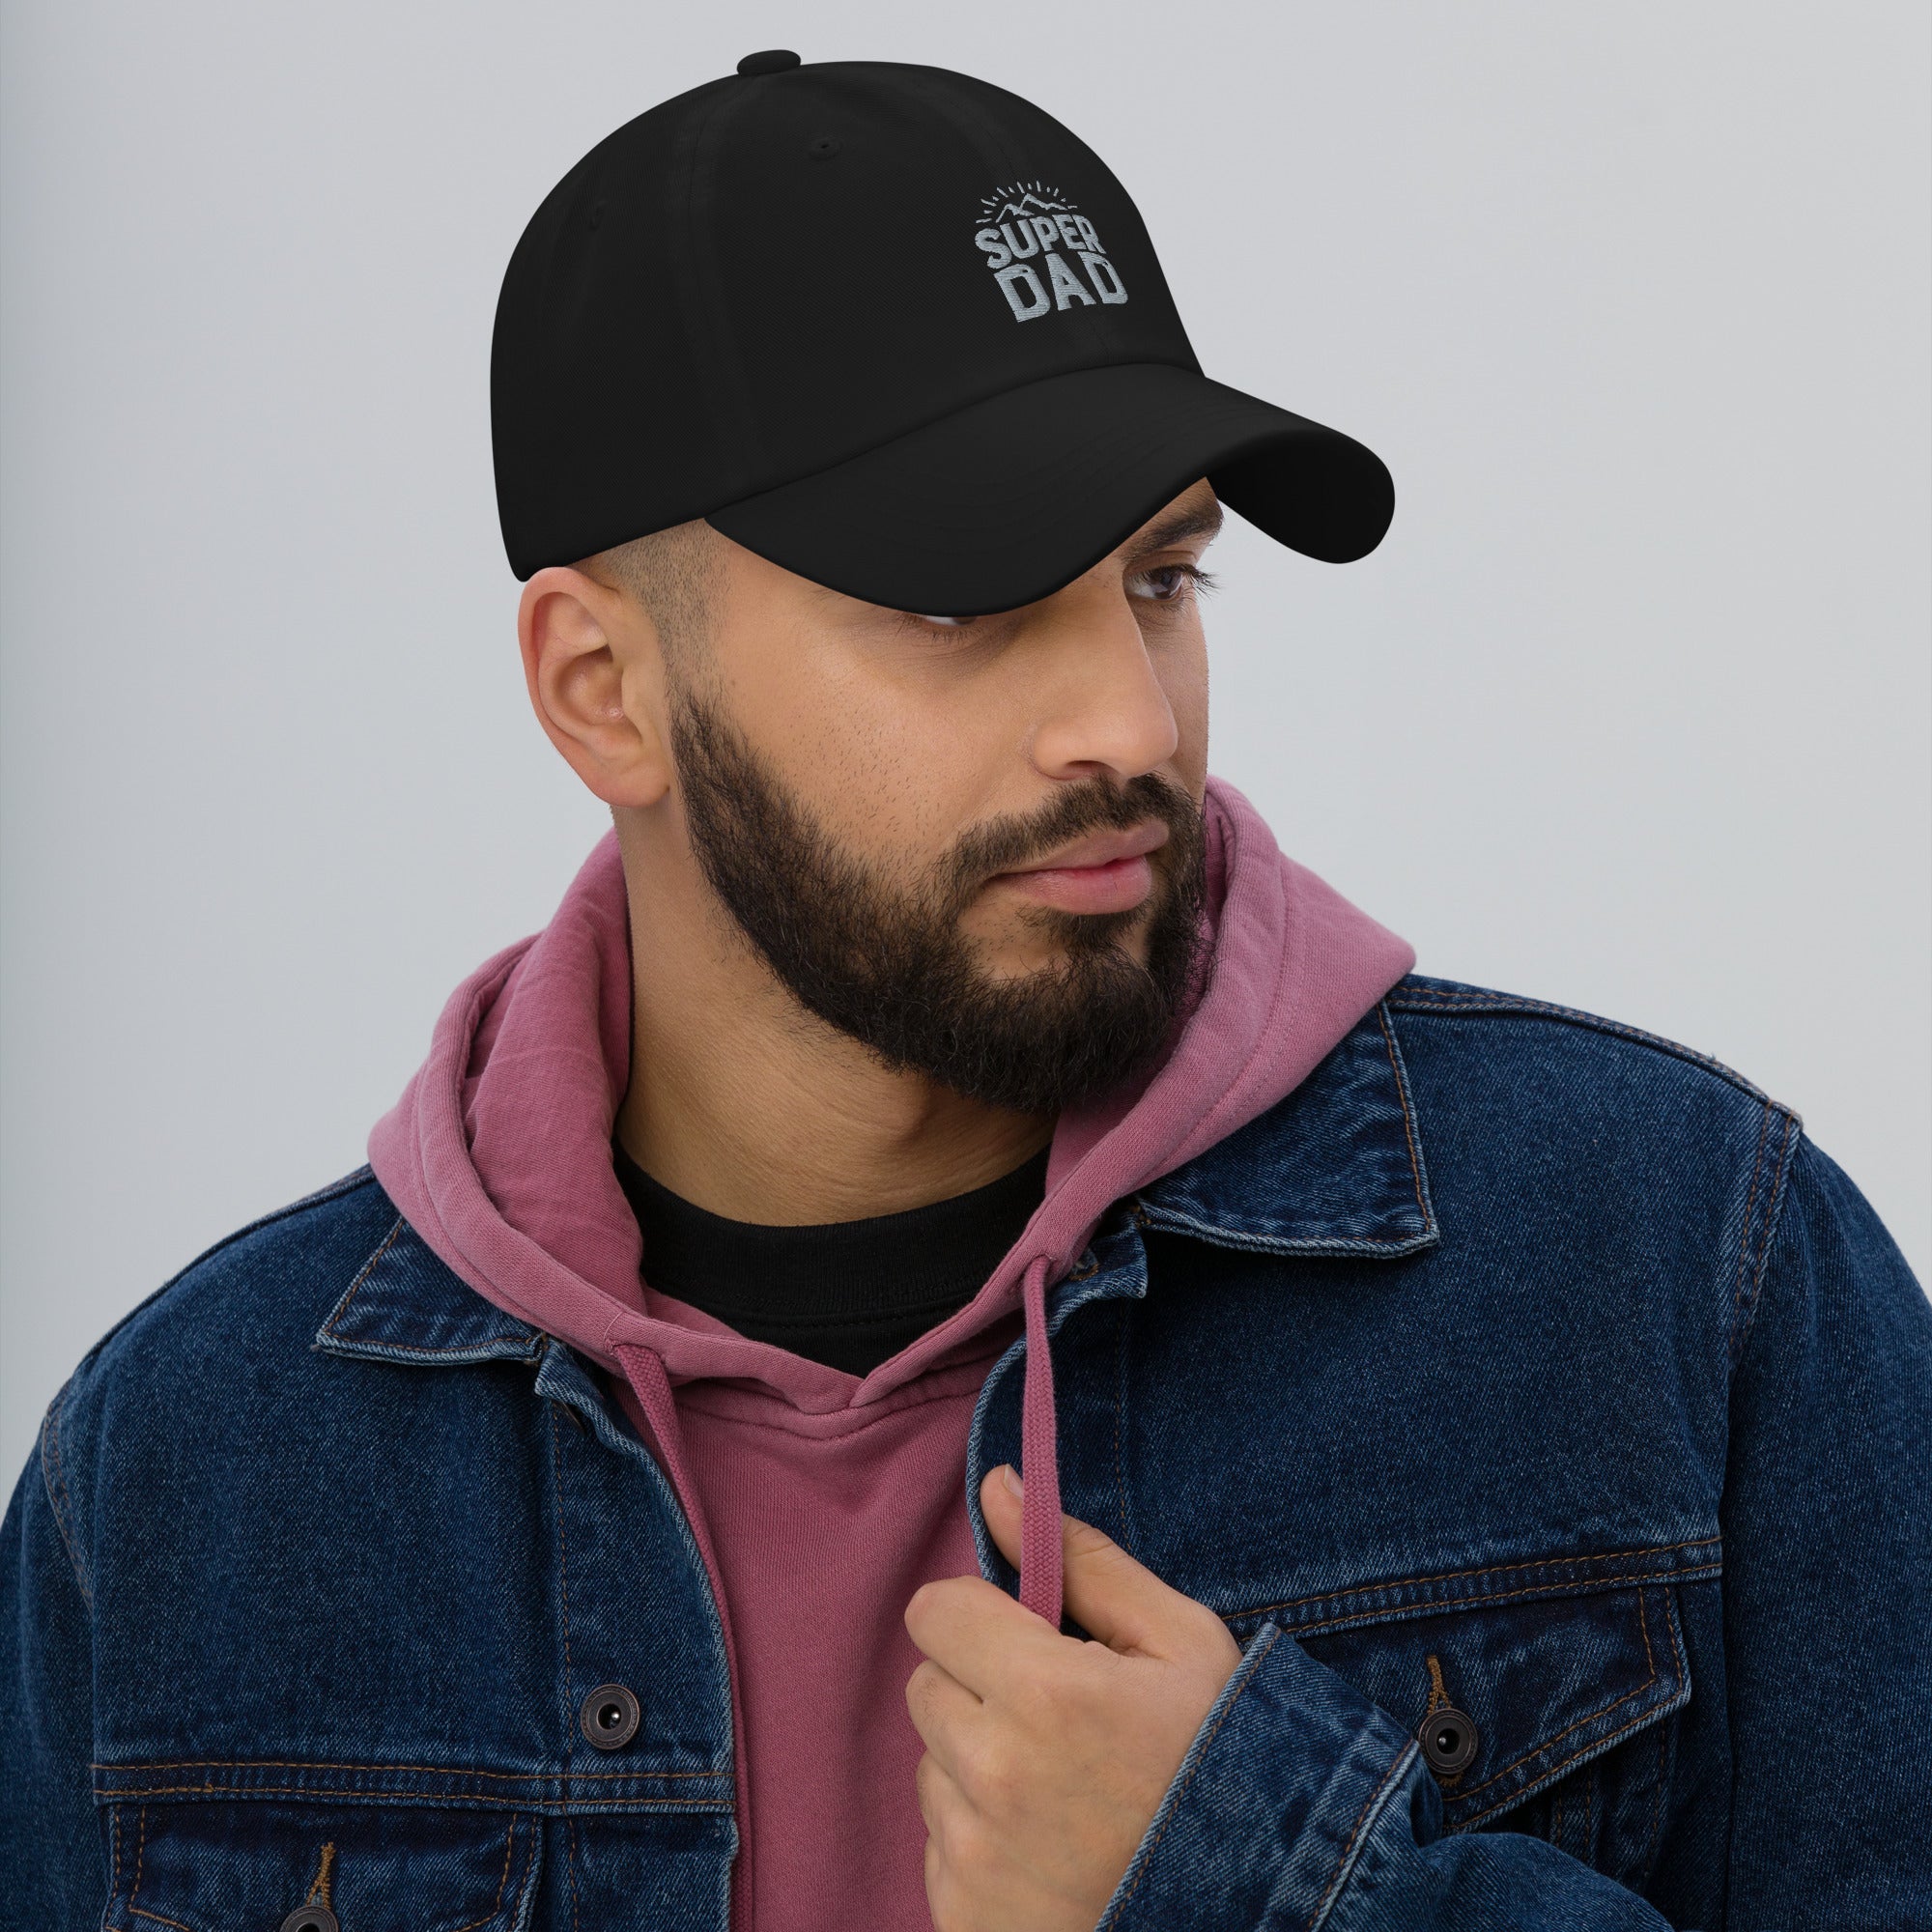 Super Dad Mountains embroidered dad hat